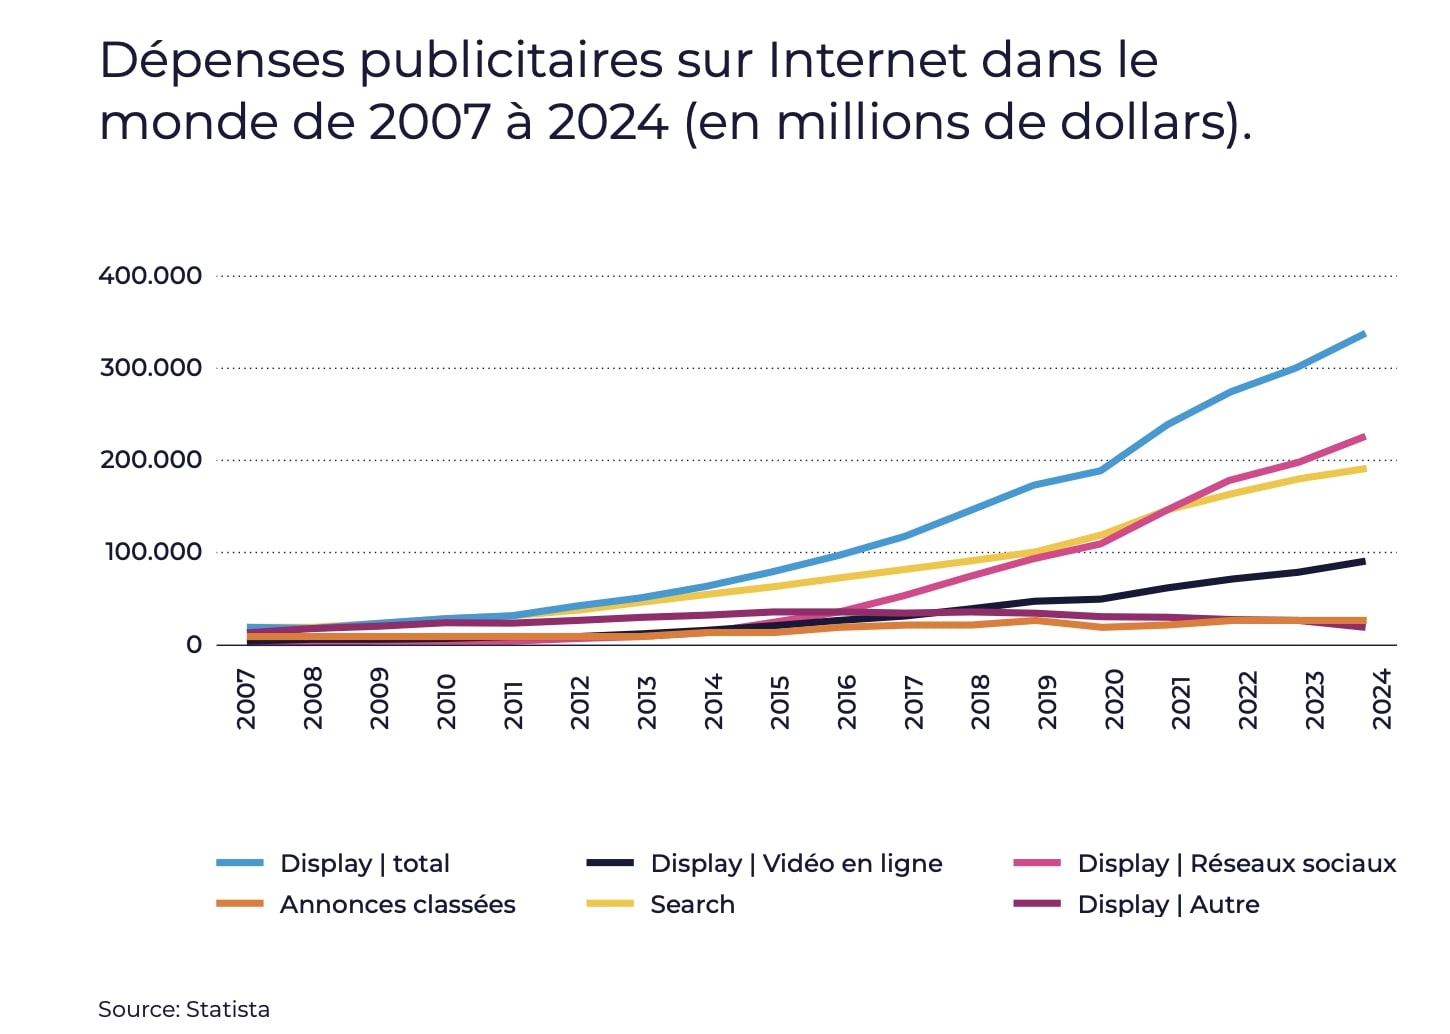 Internet advertising expenditure worldwide from 2007 to 2024 (in millions of dollars): increase